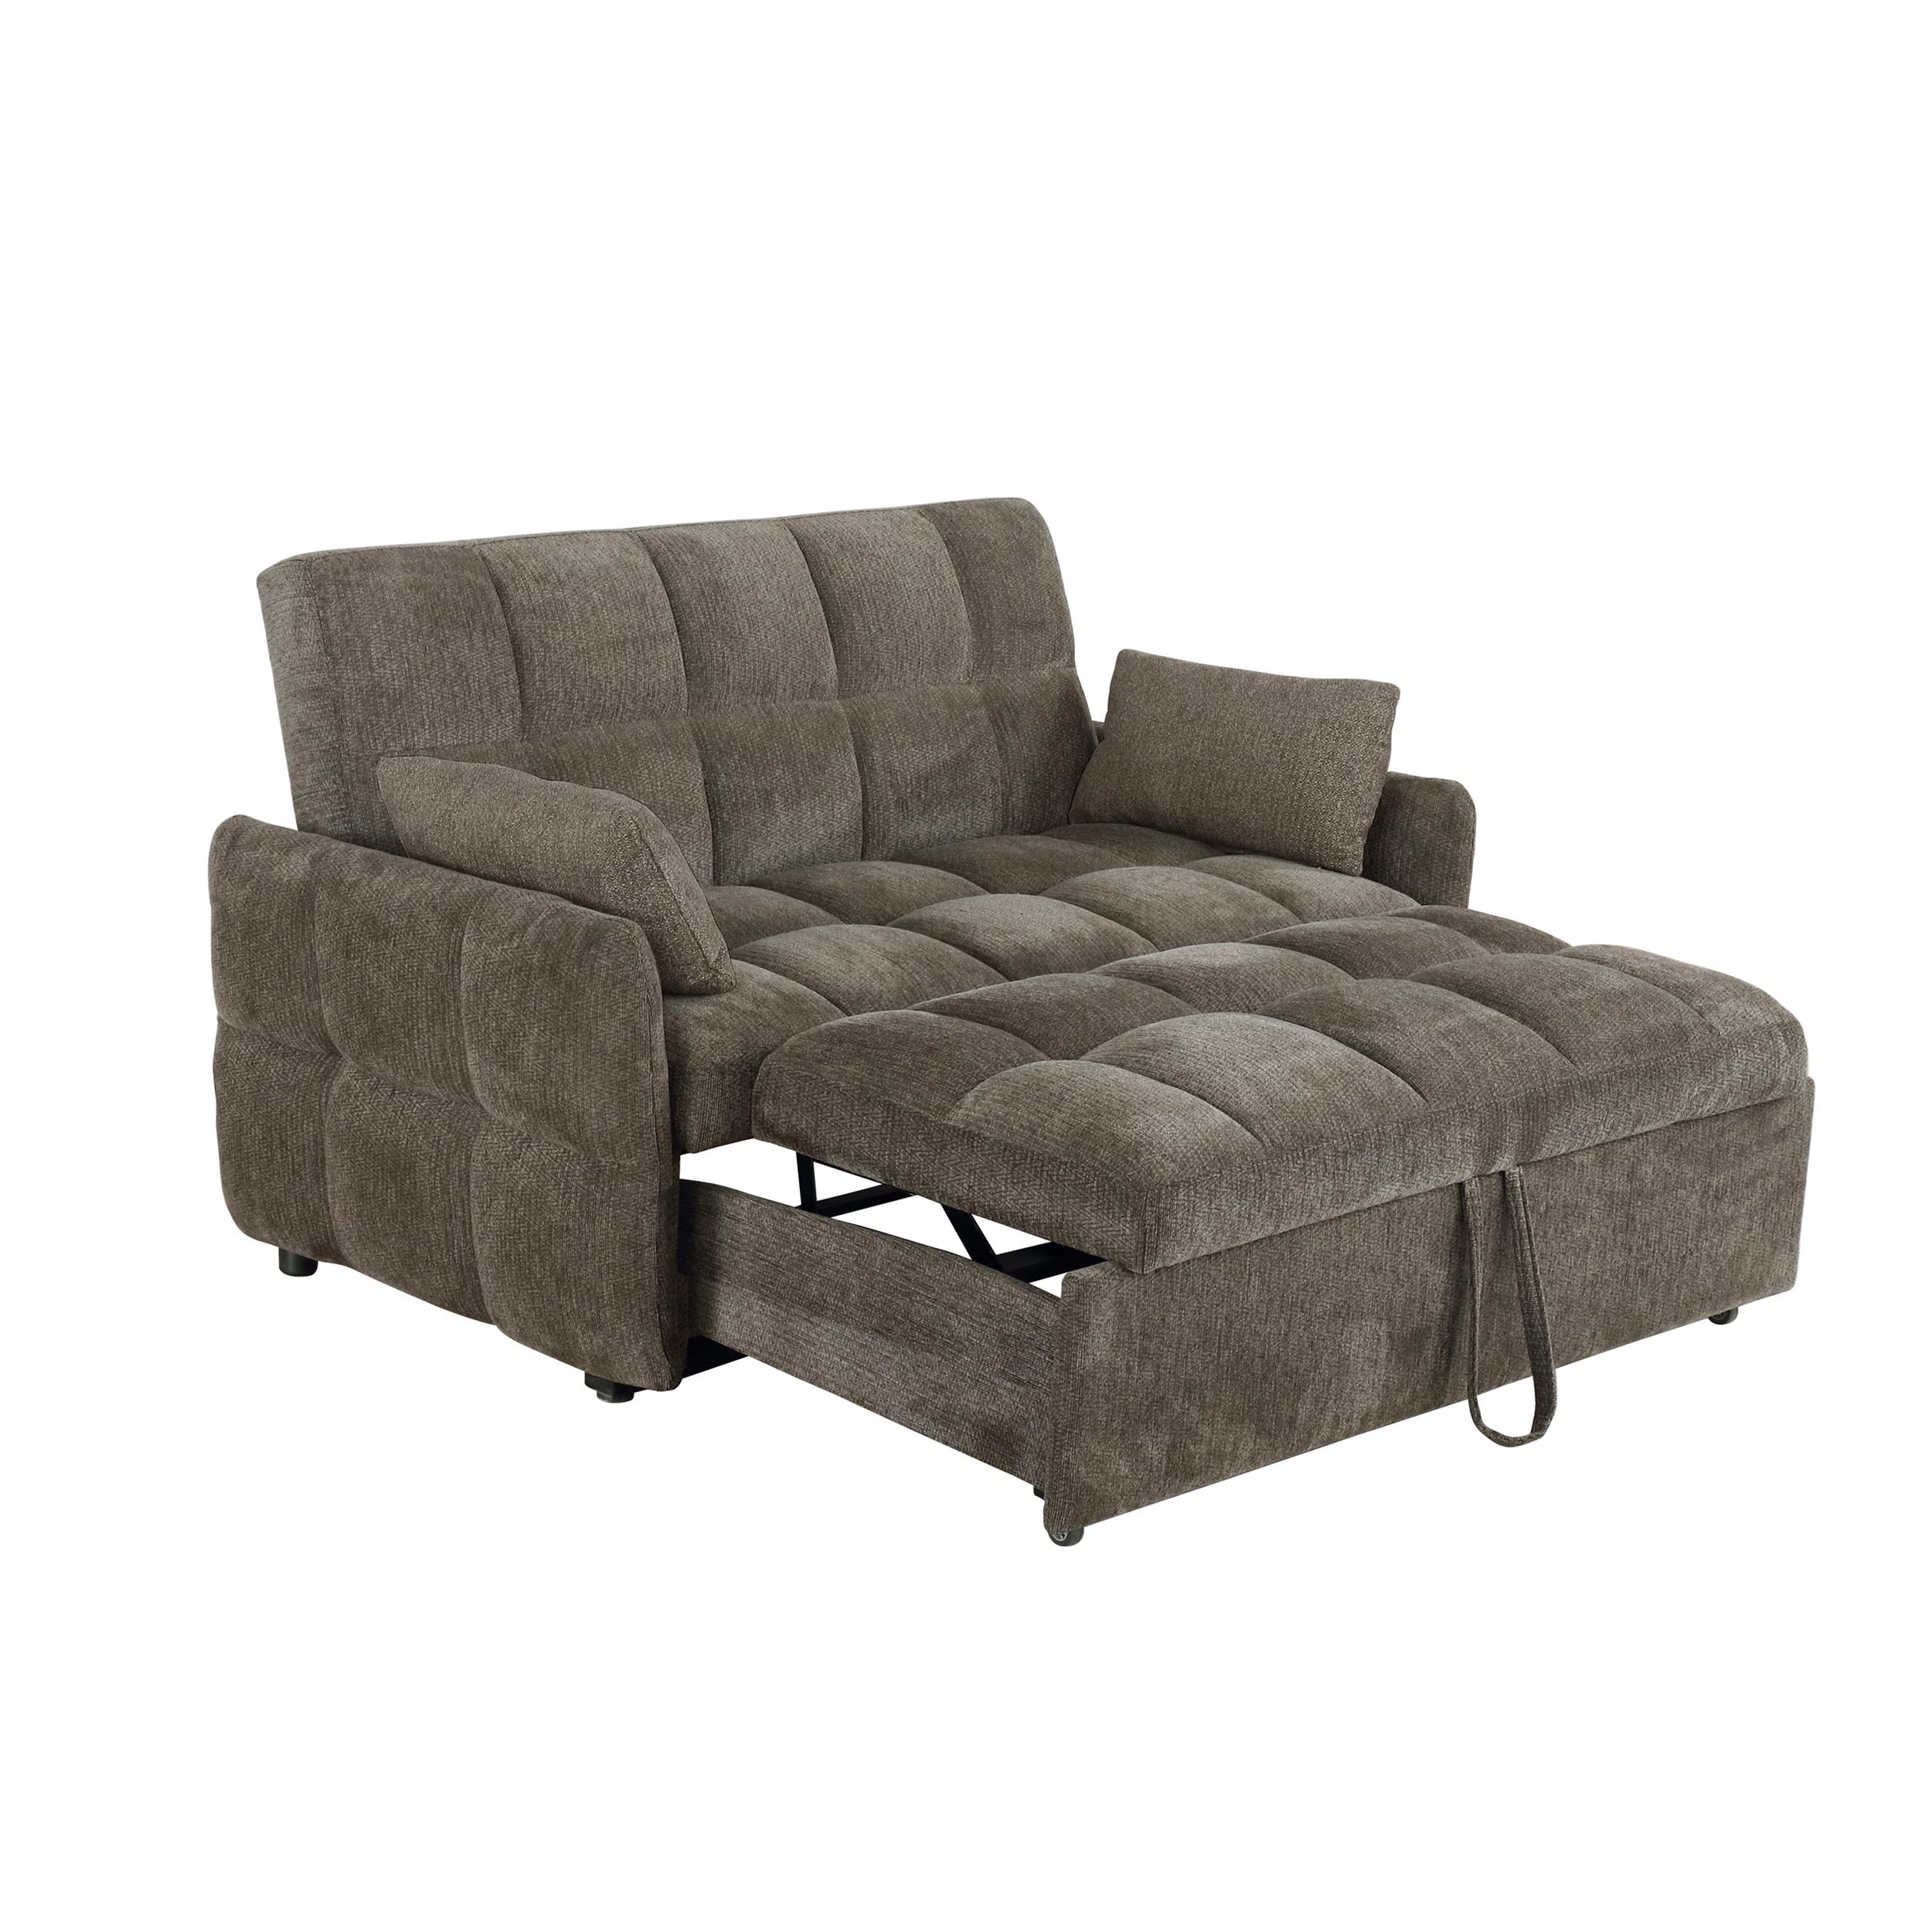 Coaster 508308 Cotswold Sleeper Sofa Bed